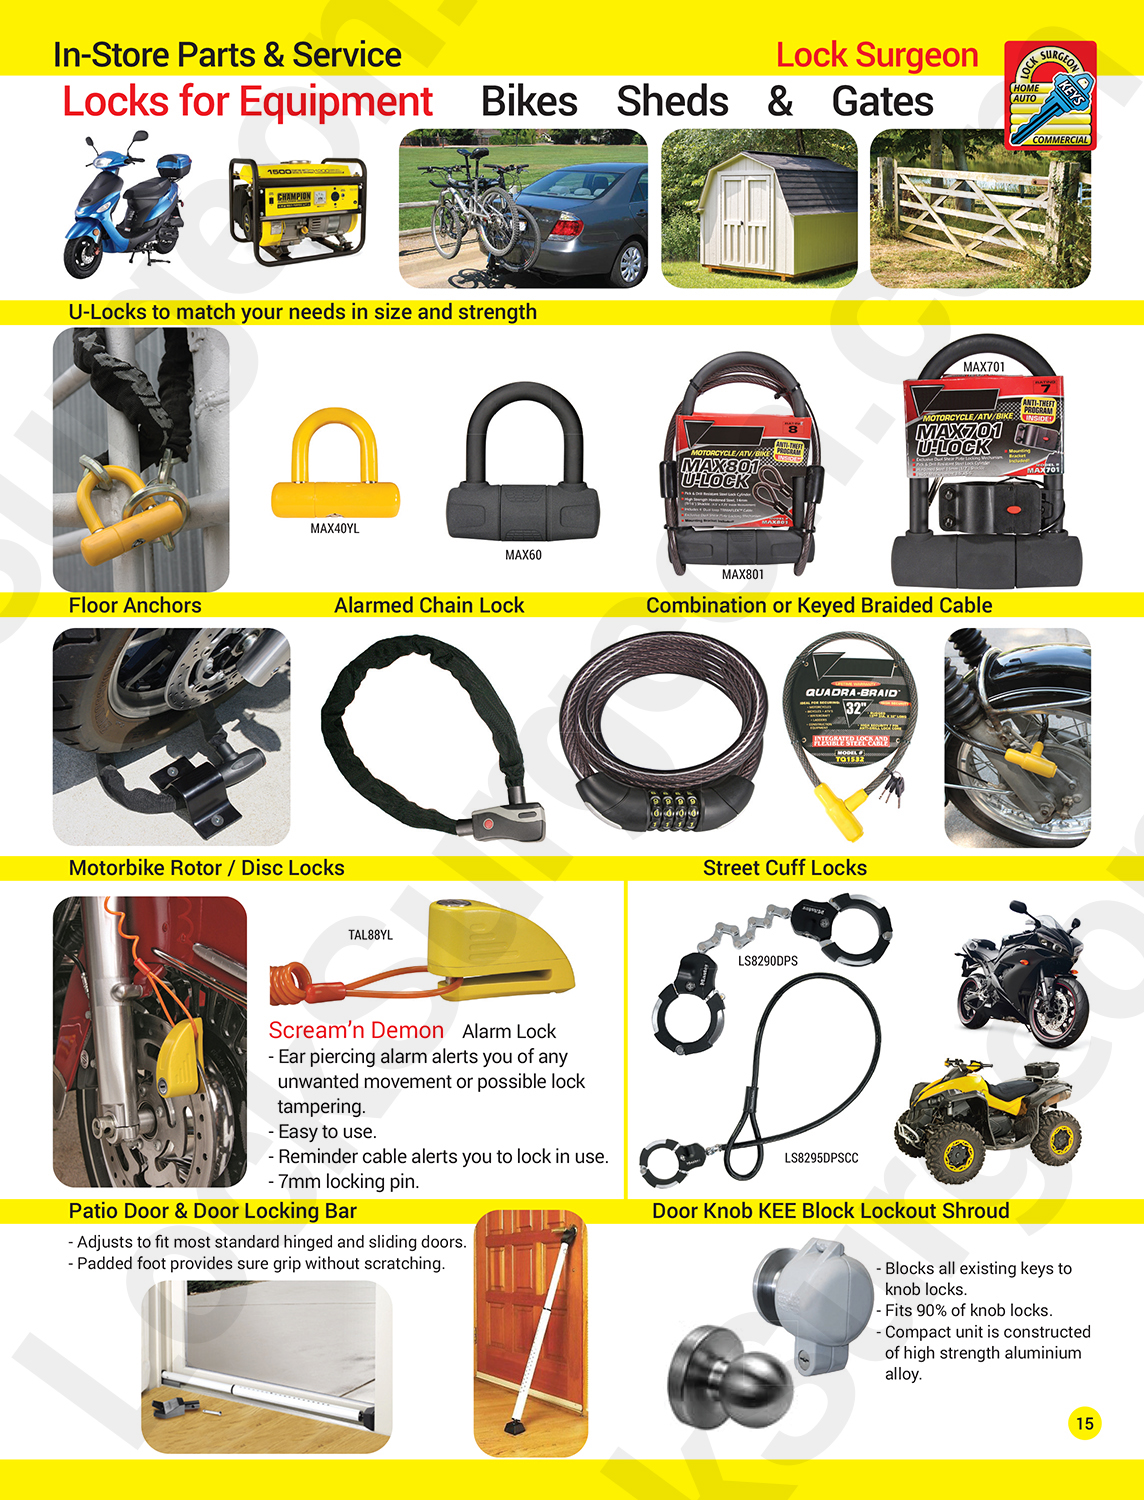 Locks for equipment. U-Locks to match your needs in size and strength in Acheson.